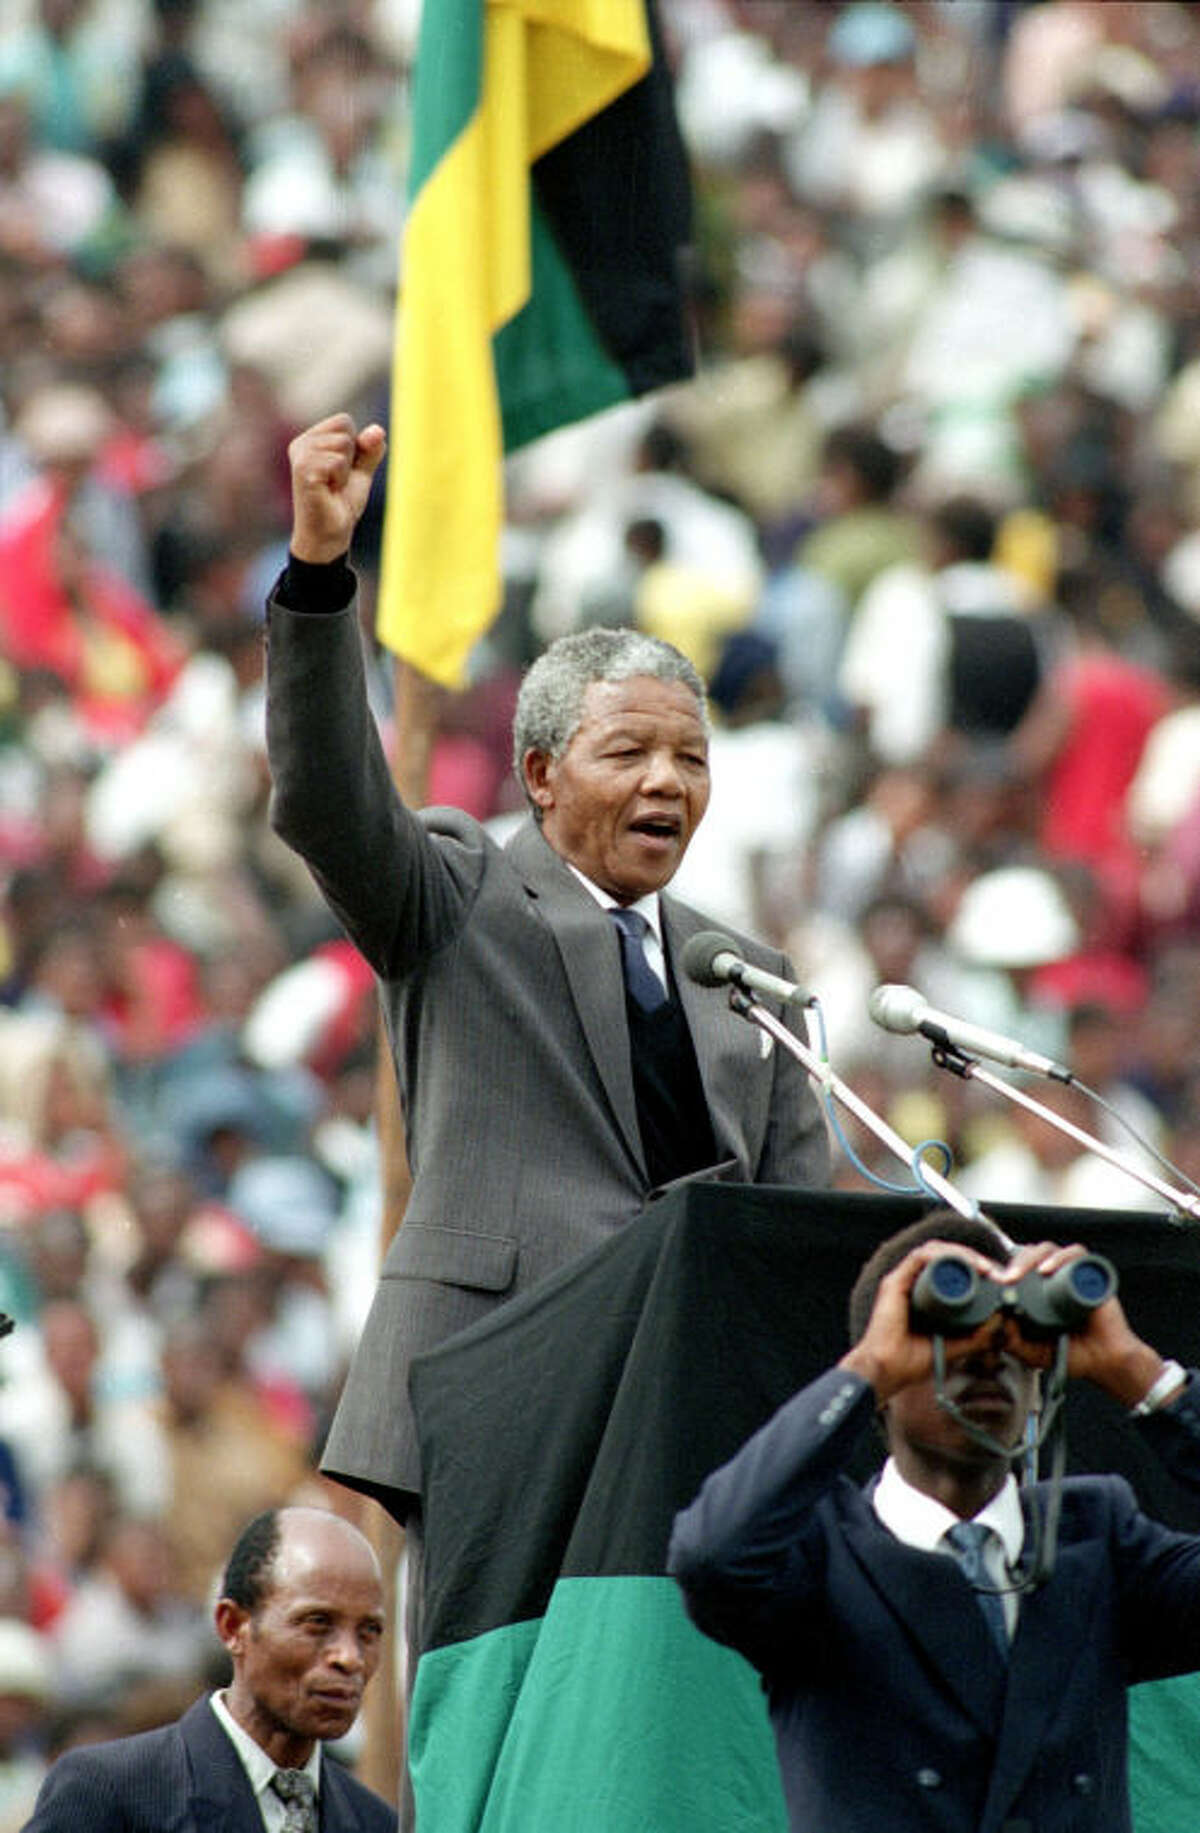 FILE - In this Feb. 13, 1990, file photo, African National Congress leader Nelson Mandela gives the black power salute to 120,000 ANC supporters packing Soccer City stadium in the Soweto township of Johannesburg, South Africa, shortly after his release from 27 years in prison. South Africa's president says, Thursday, Dec. 5, 2013, that Mandela has died. He was 95. (AP Photo, File)